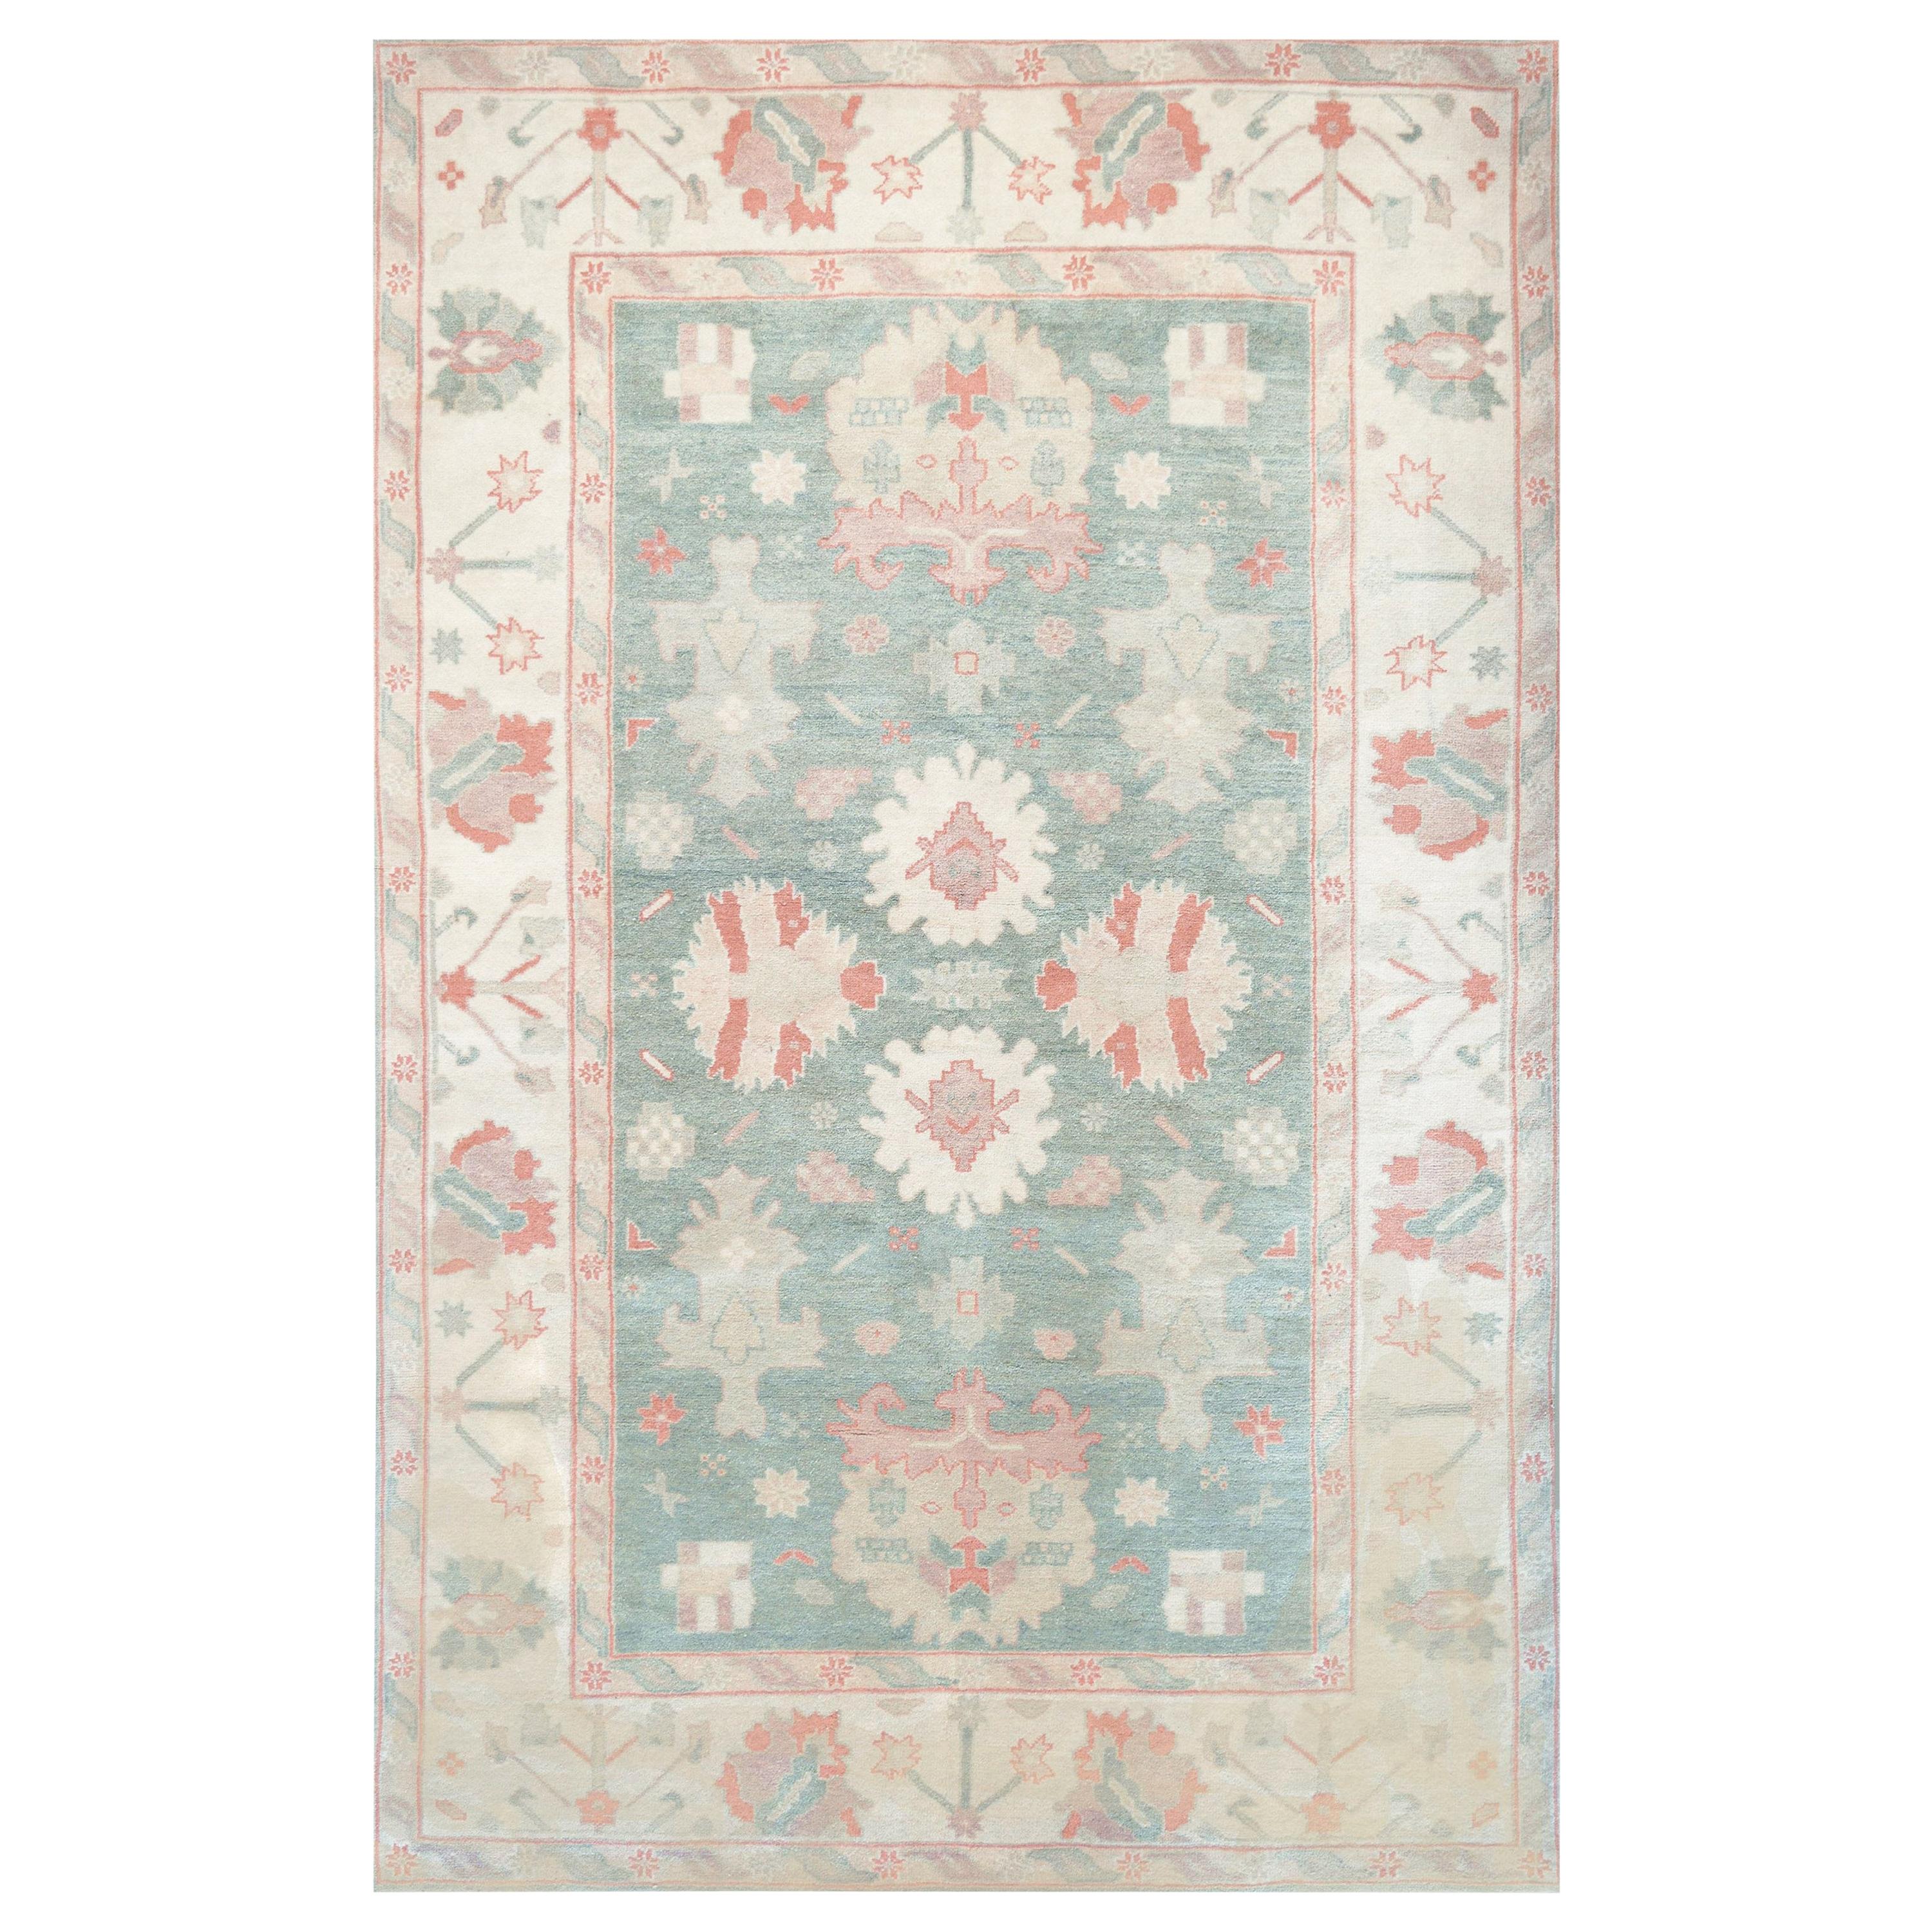 Modern Hand-Knotted Wool Pale-Green Oushak-Inspired Rug